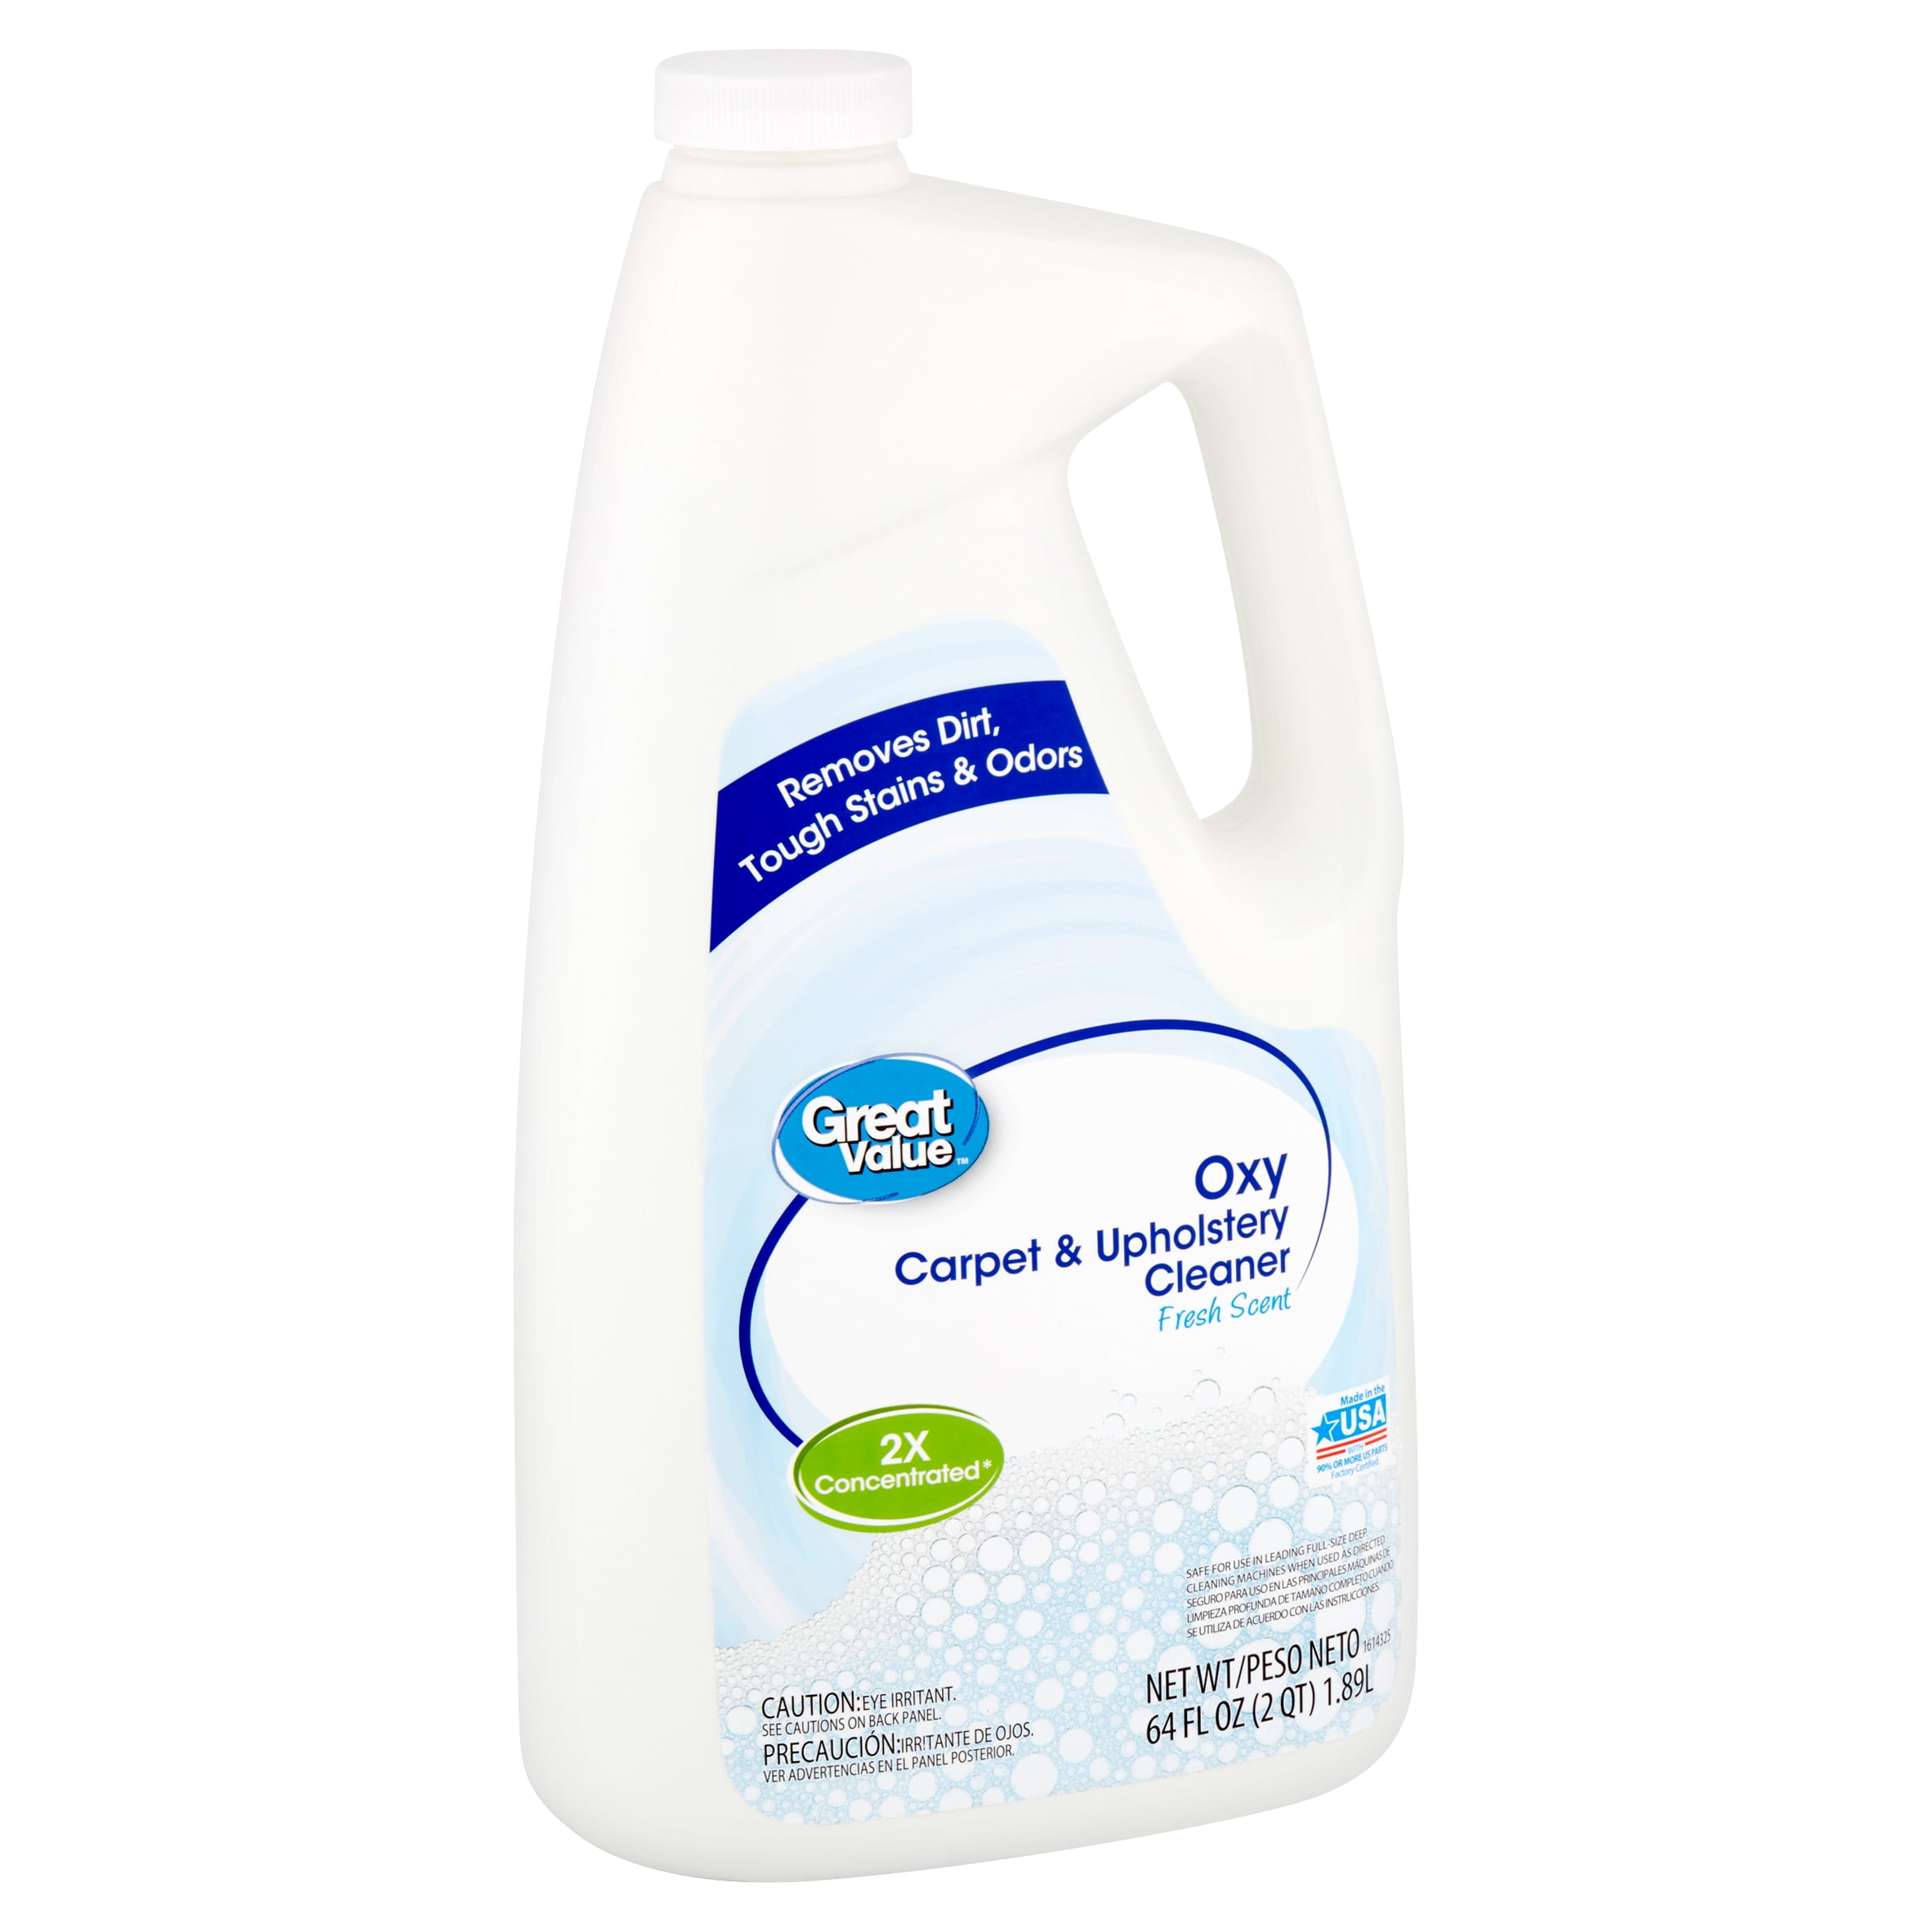 Great Value Fresh Scent Oxy Carpet & Upholstery Cleaner, 64 fl oz ...